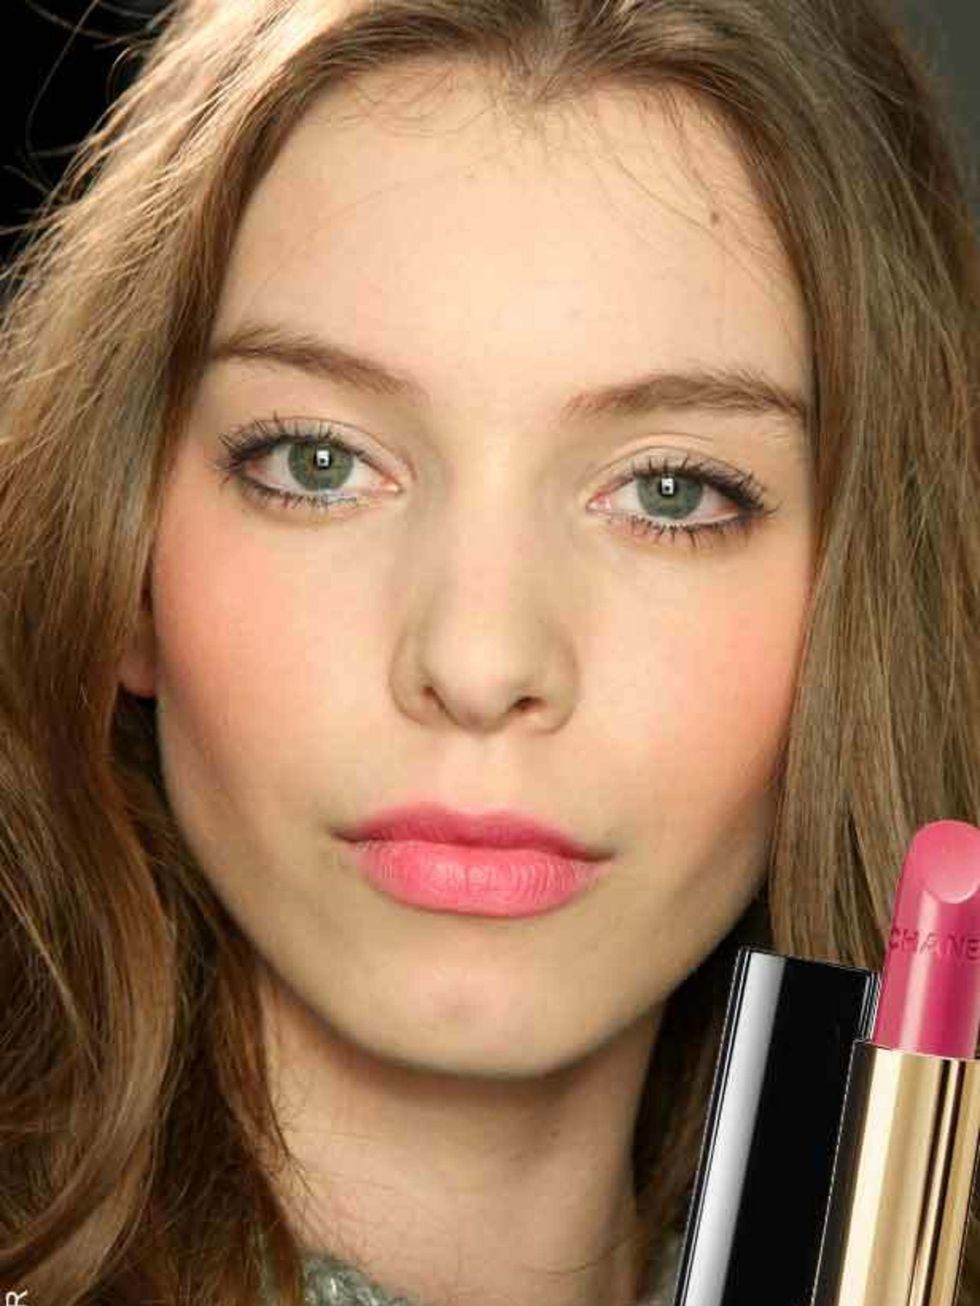 <p>Pink is the fastest way to brighten your complexion on dull days. Try dabbing Chanel Rouge Allure Lipstick in Insolente, £24 (<a href="http://www.boots.com/en/CHANEL-ROUGE-ALLURE-Luminous-Satin-Lip-Colour_24600/">Boots</a>), onto lips for a laid-back w